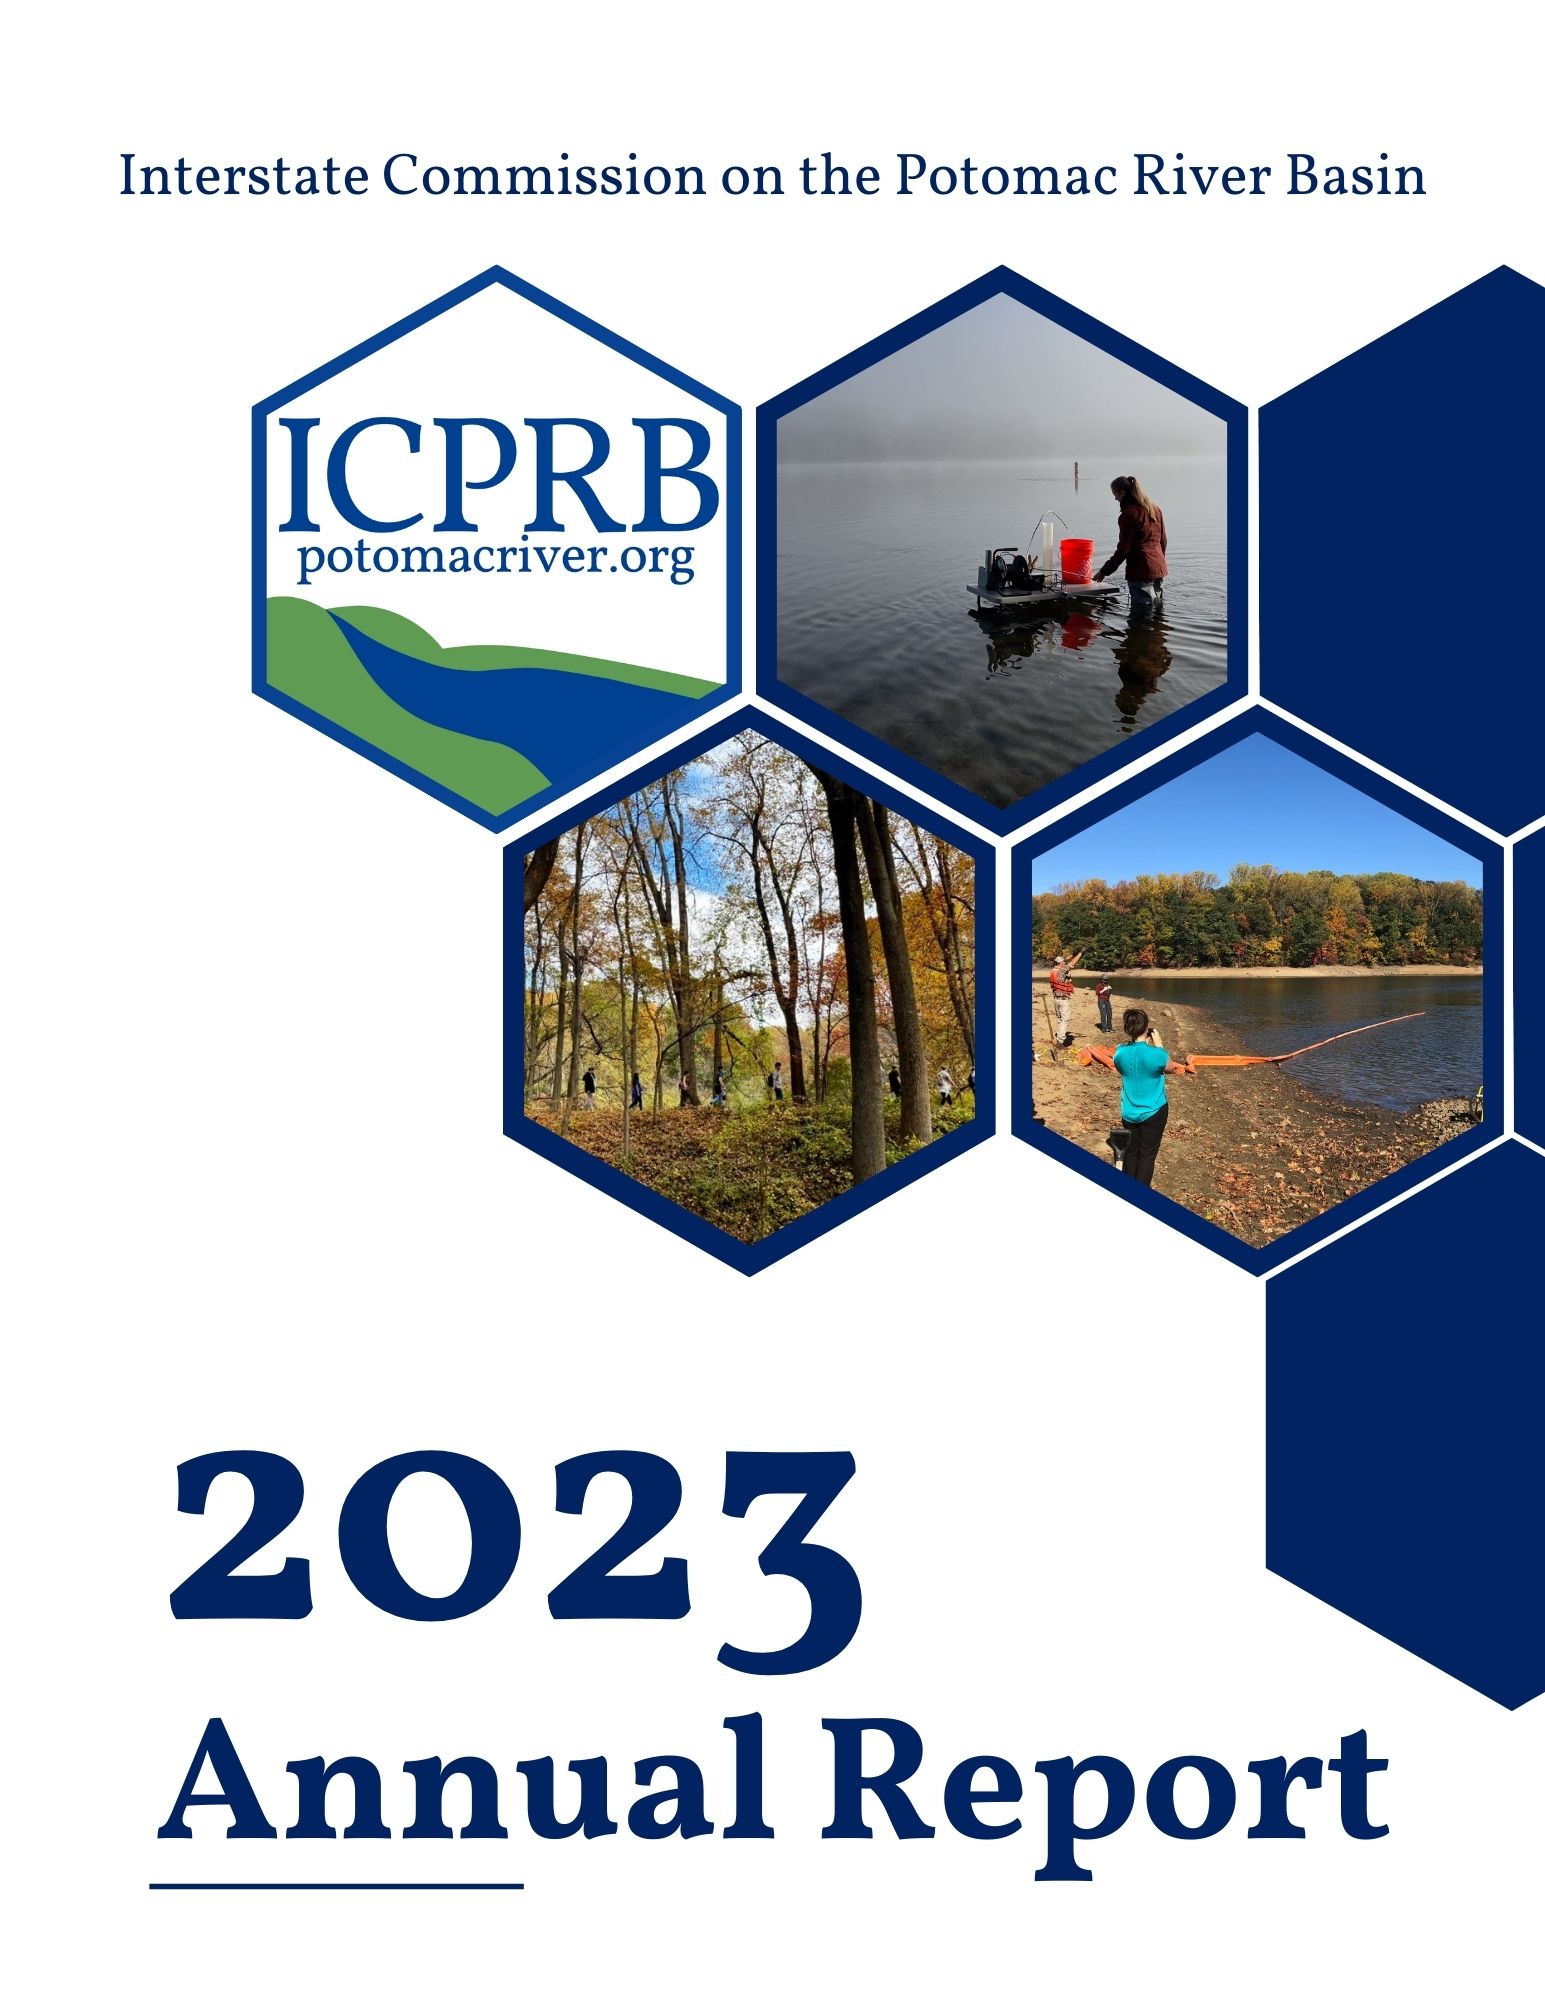 Cover of ICPRB's 2023 Annual Report